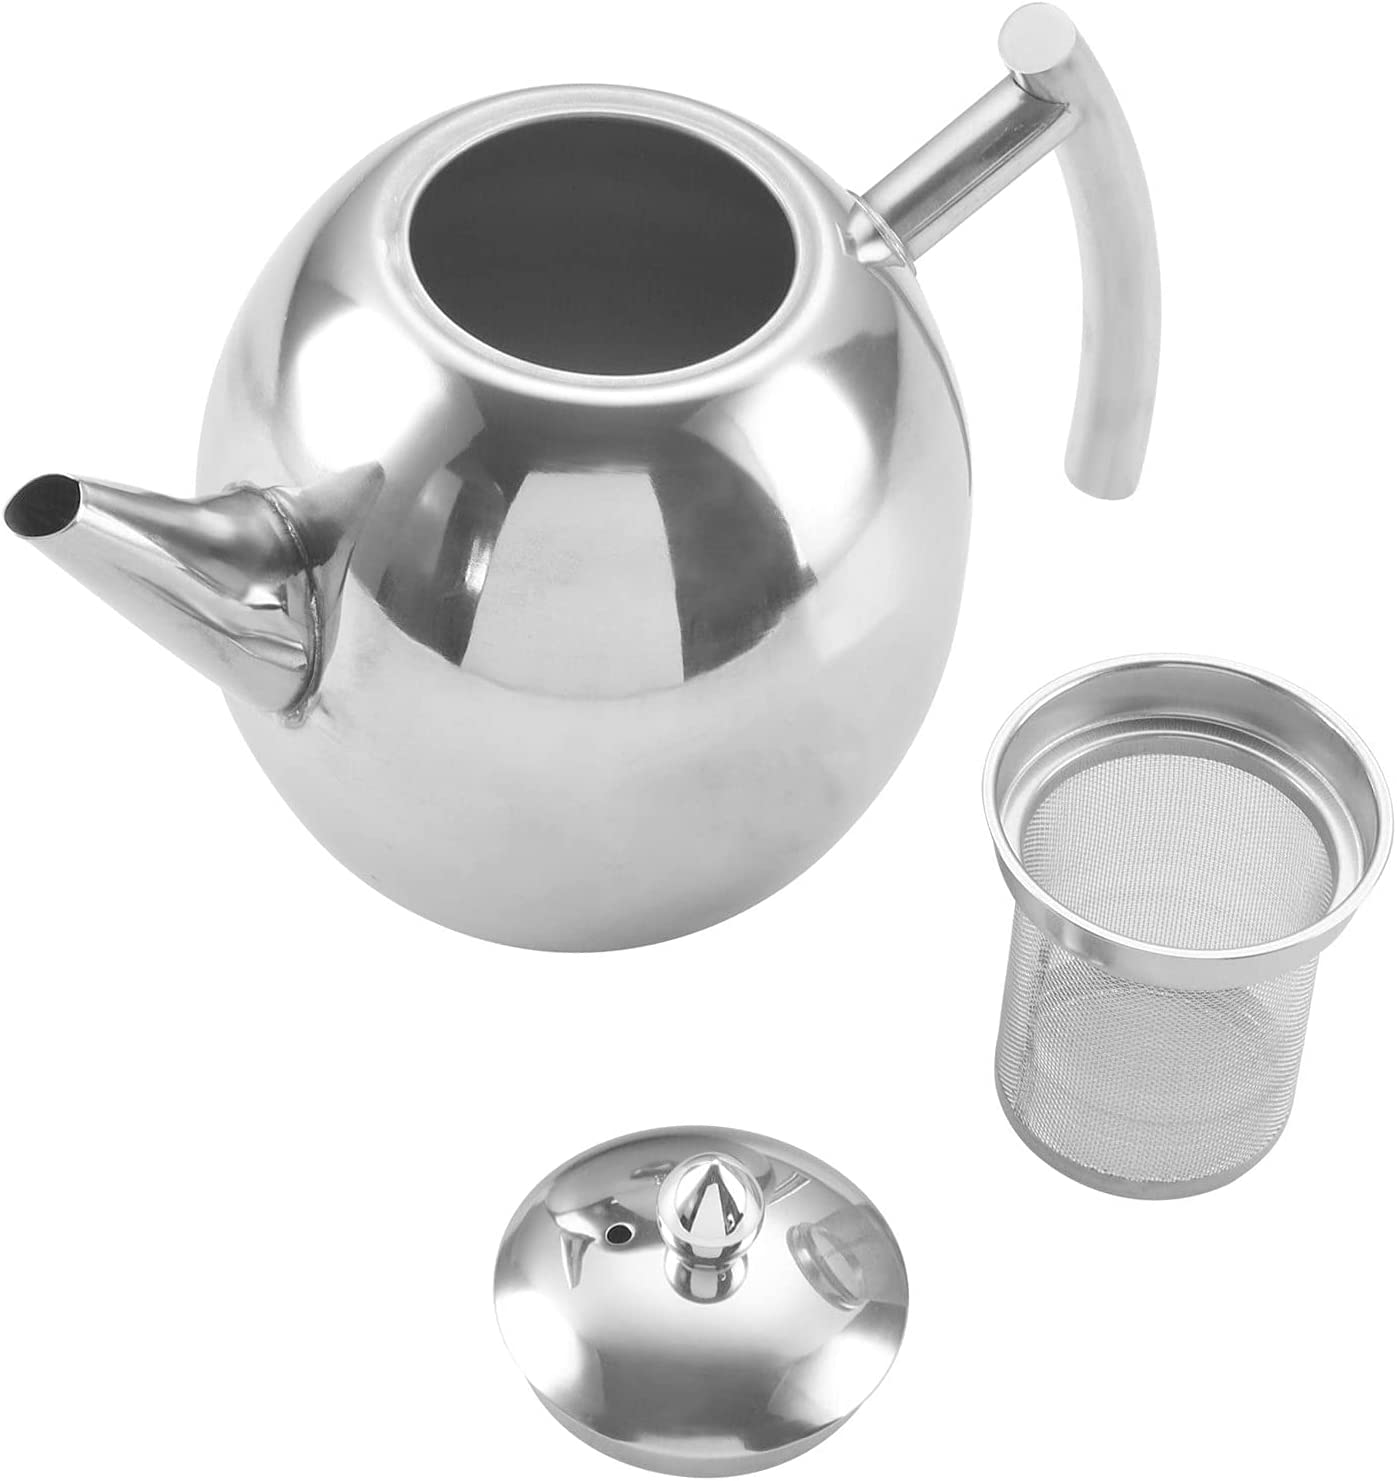 Stainless Steel Teapot with Strainer Insert, 1.5 L / 2 L Kettle Coffee Pot with Lid and Carry Handle, Heated Tea Maker for All Scented Tea and Infusion Tea (Upgrade: 1 L)